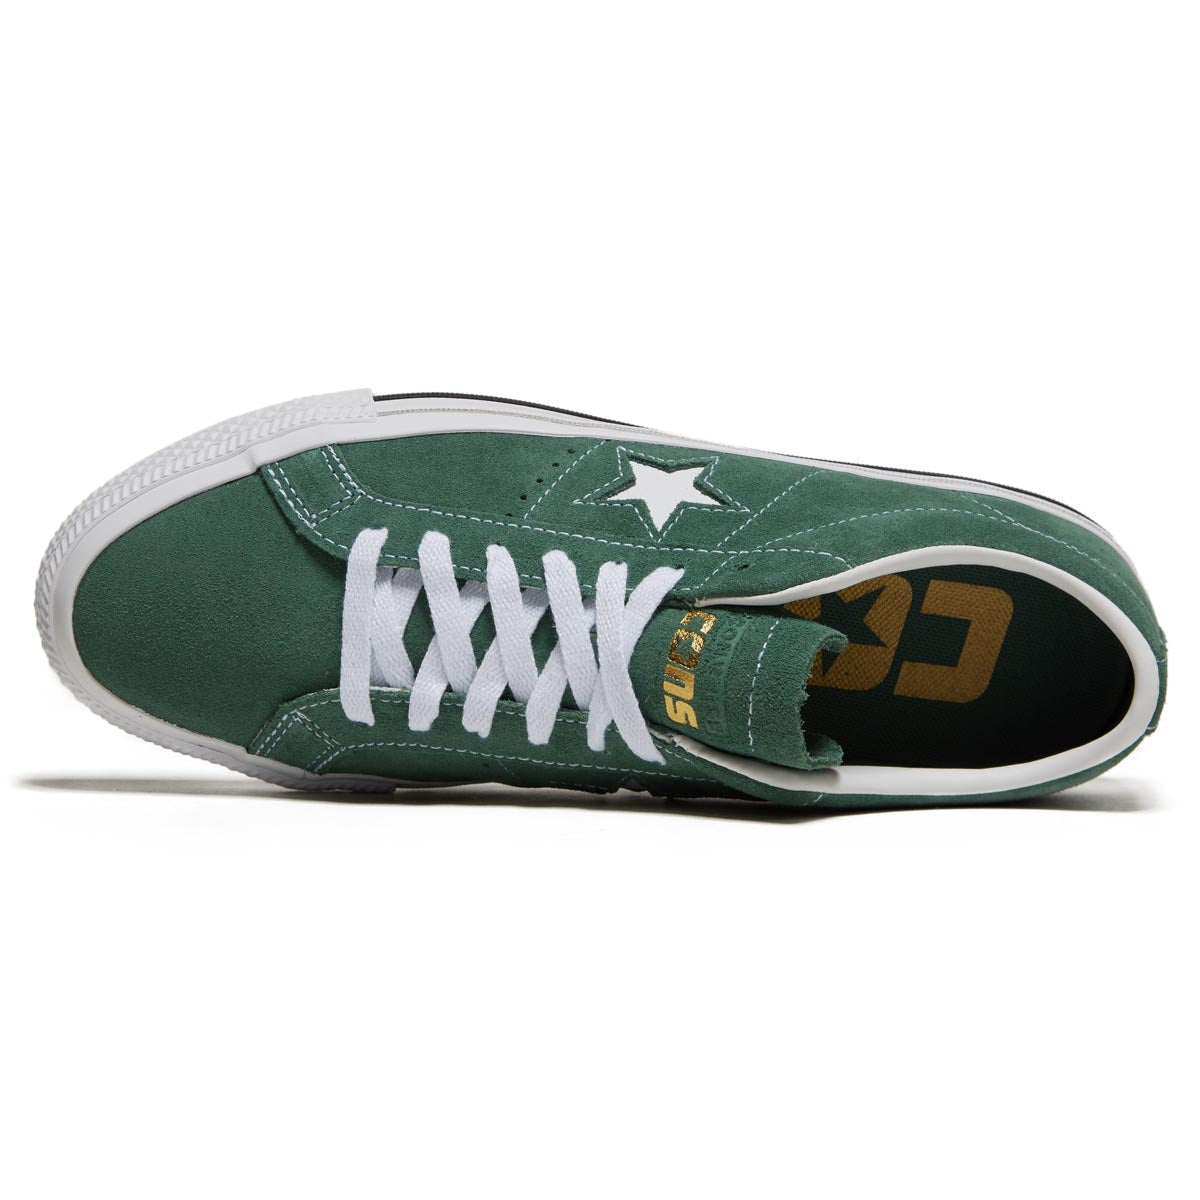 Converse One Star Pro Shoes - Admiral Elm/White/Black image 3